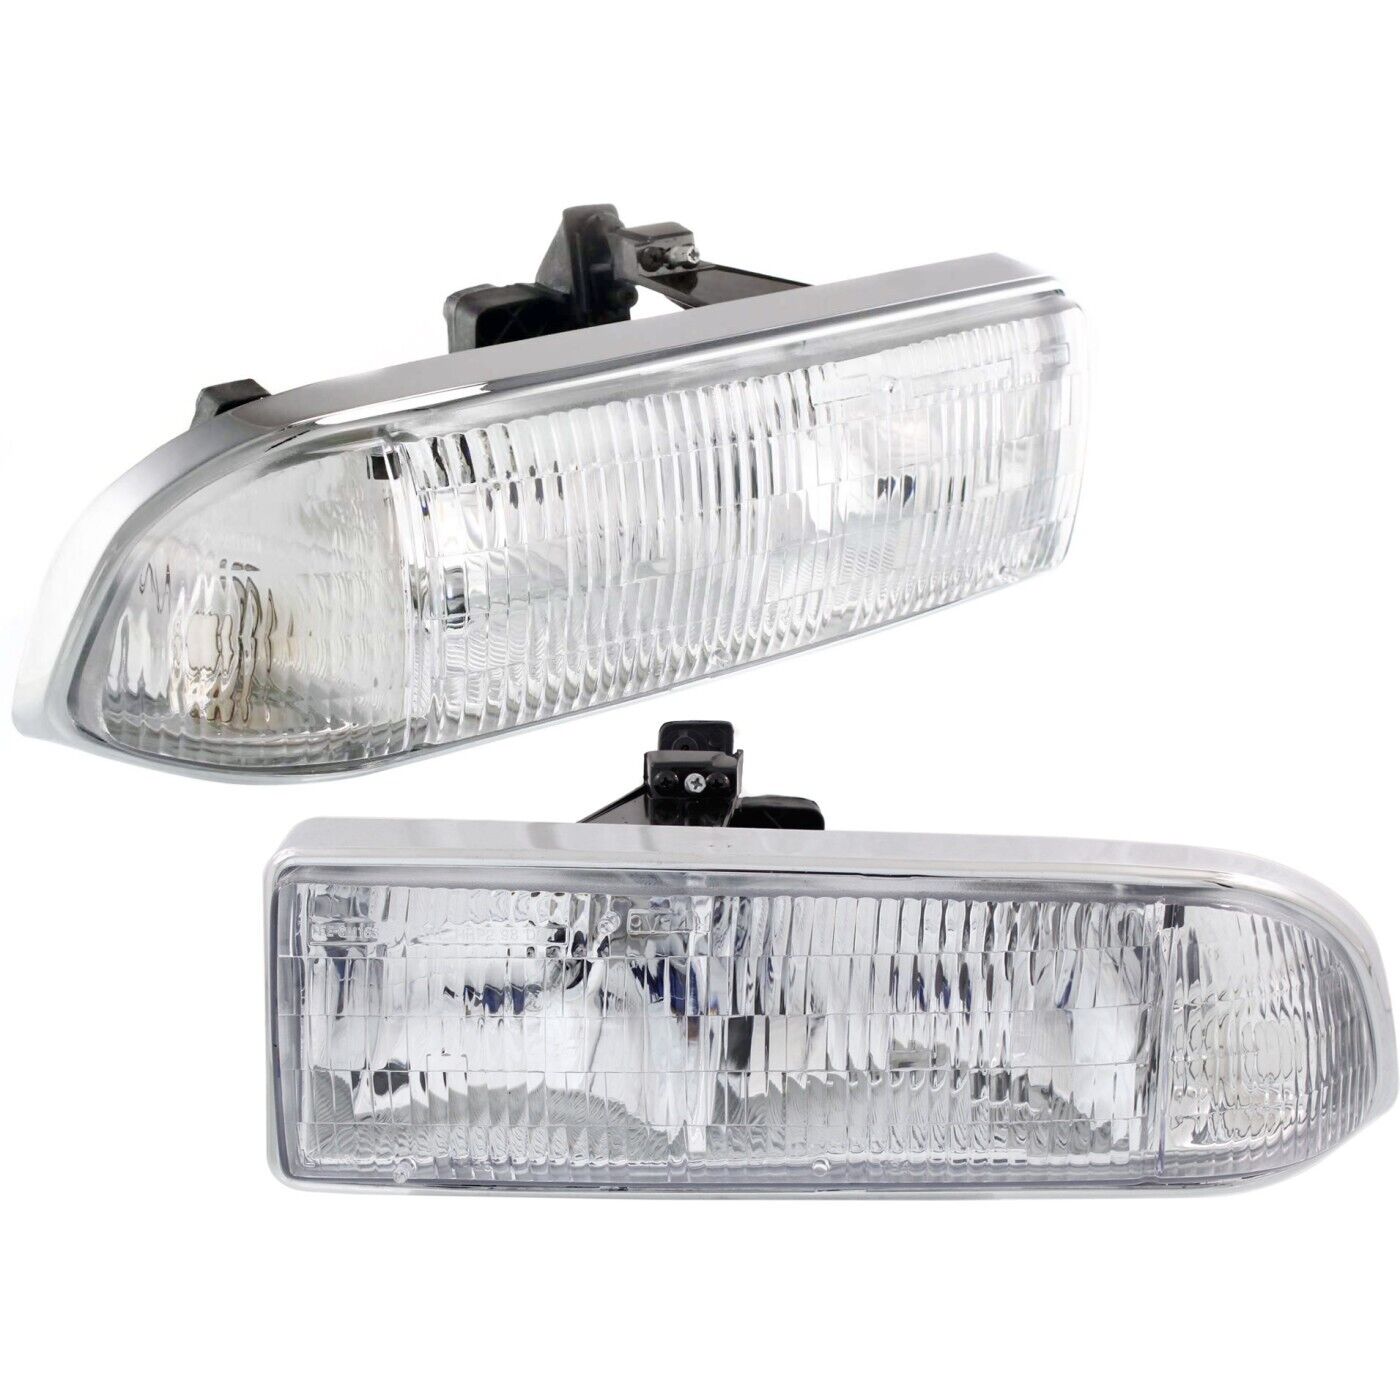 Headlight Assembly Set For 1998-05 Chevy Blazer 1998-04 S10 Left Right With Bulb